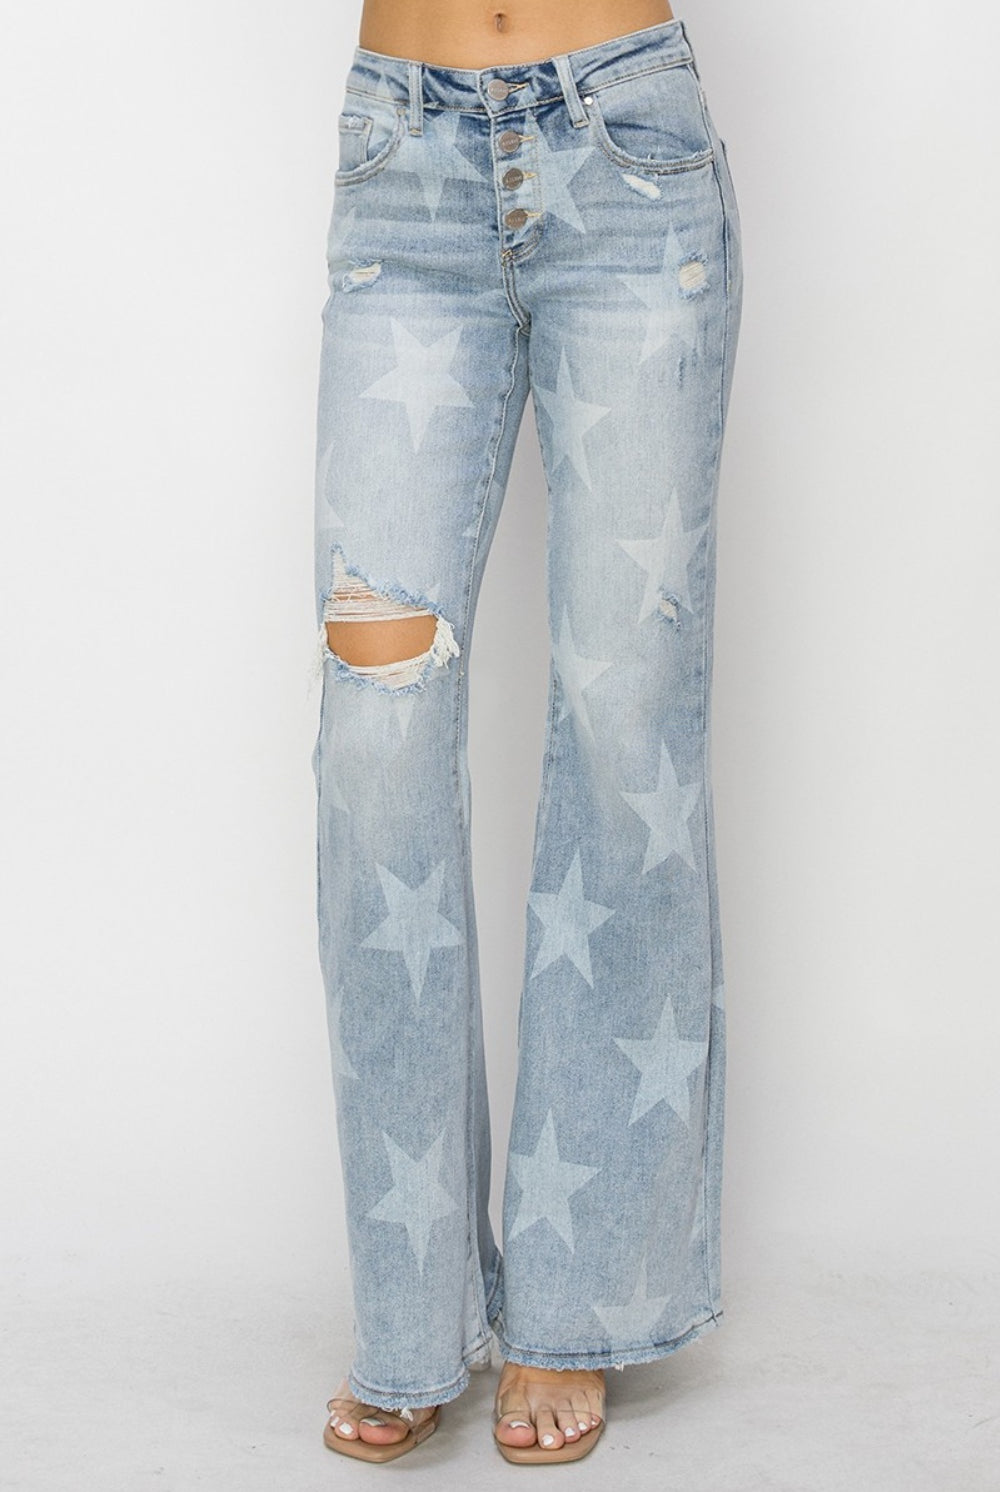 RISEN Mid Rise Button Fly Start Print Flare Jeans - GemThreads Boutique RISEN Mid Rise Button Fly Start Print Flare Jeans